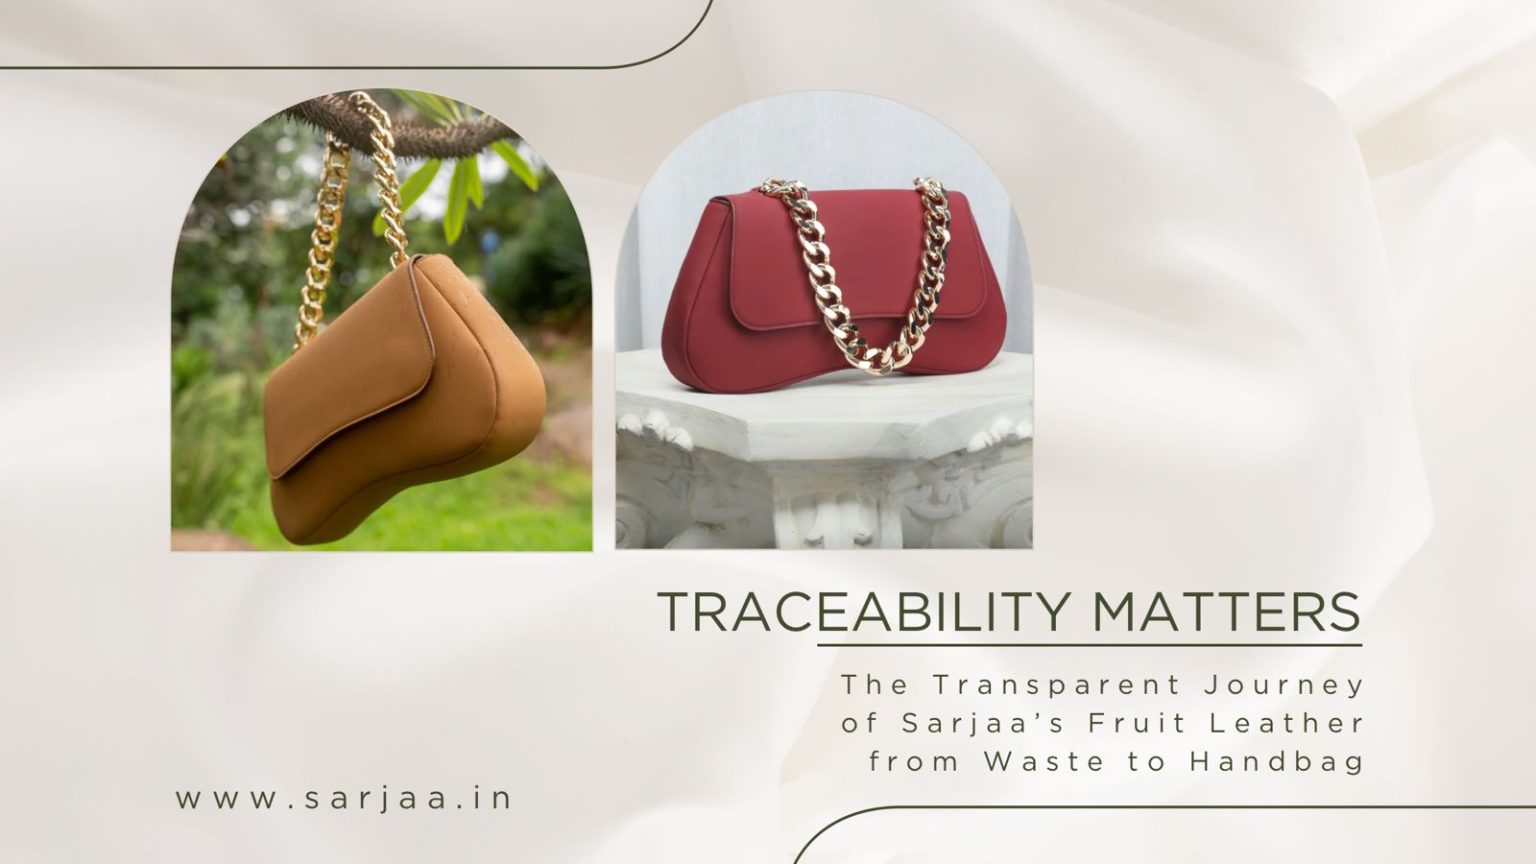 Traceability Matters: The Transparent Journey of Sarjaa’s Fruit Leather from Waste to Handbag